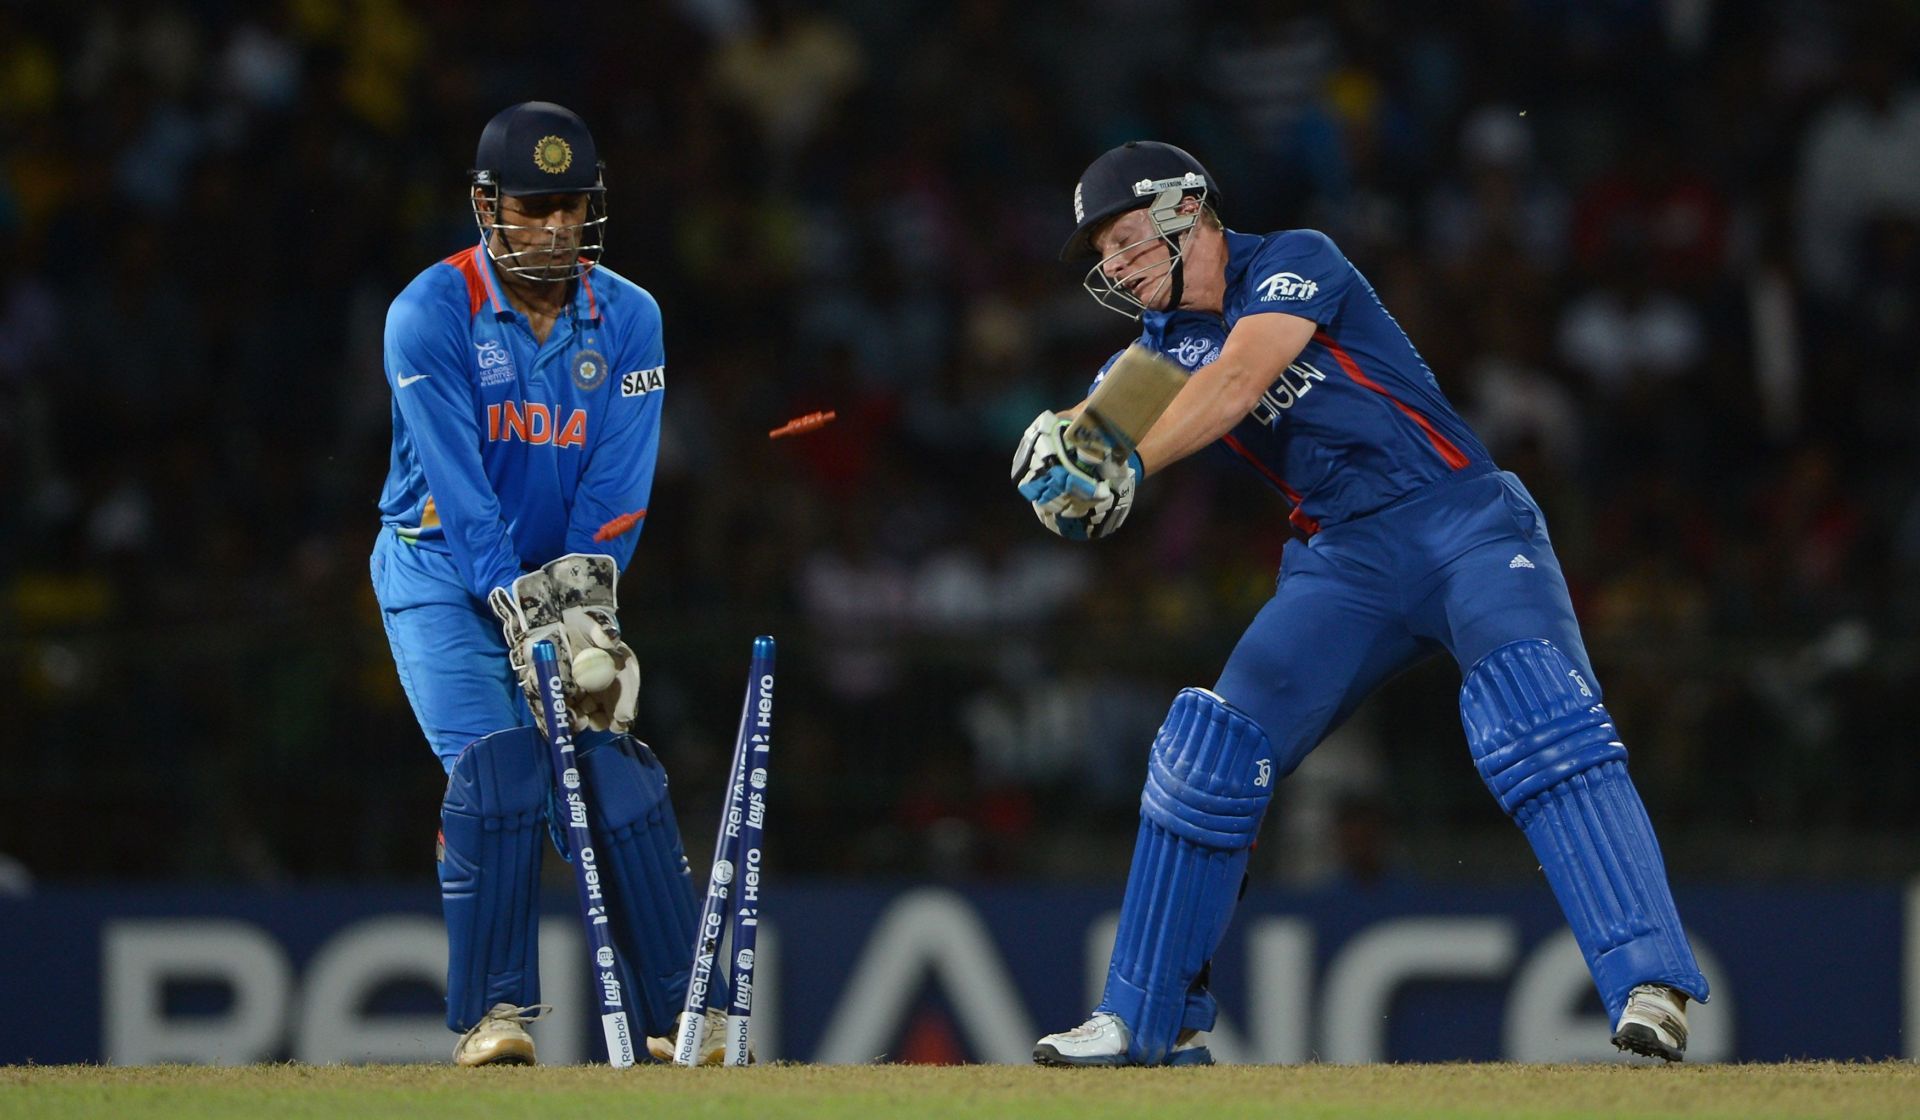 India crushed England in the group stage of the 2012 T20 World Cup